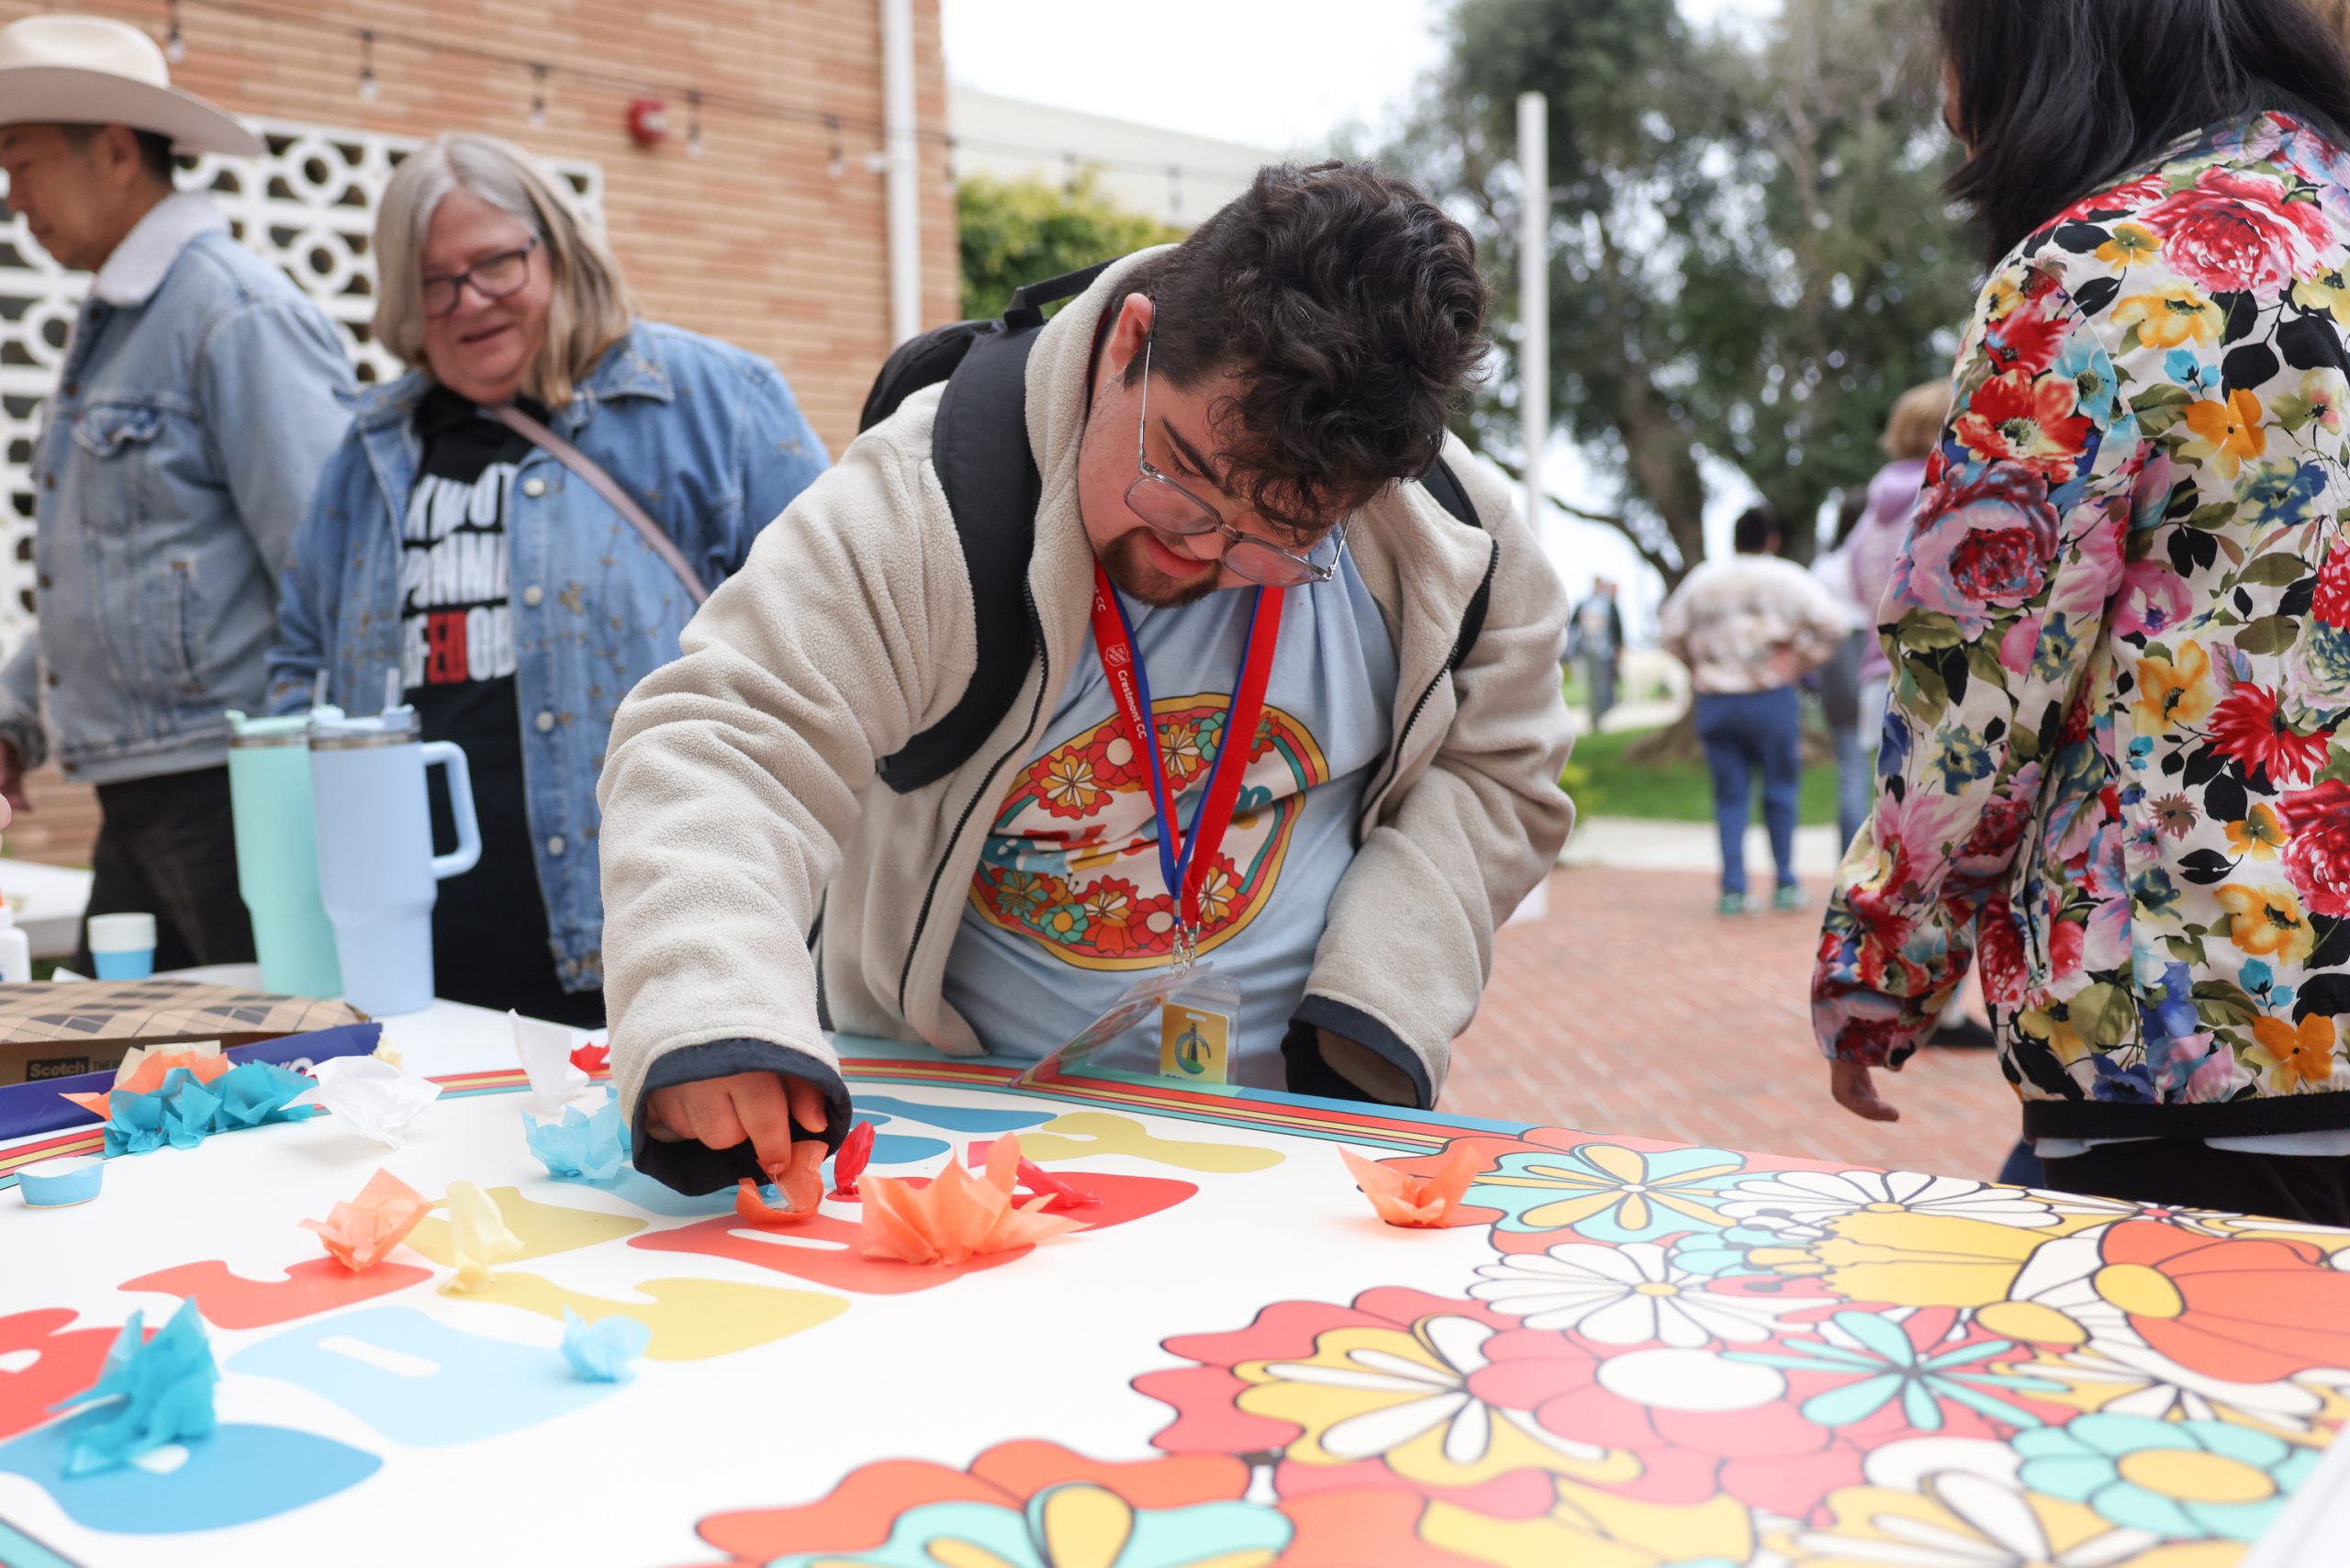 Salvation Army Adaptive Retreat gives a 'more full picture' of the kingdom of God